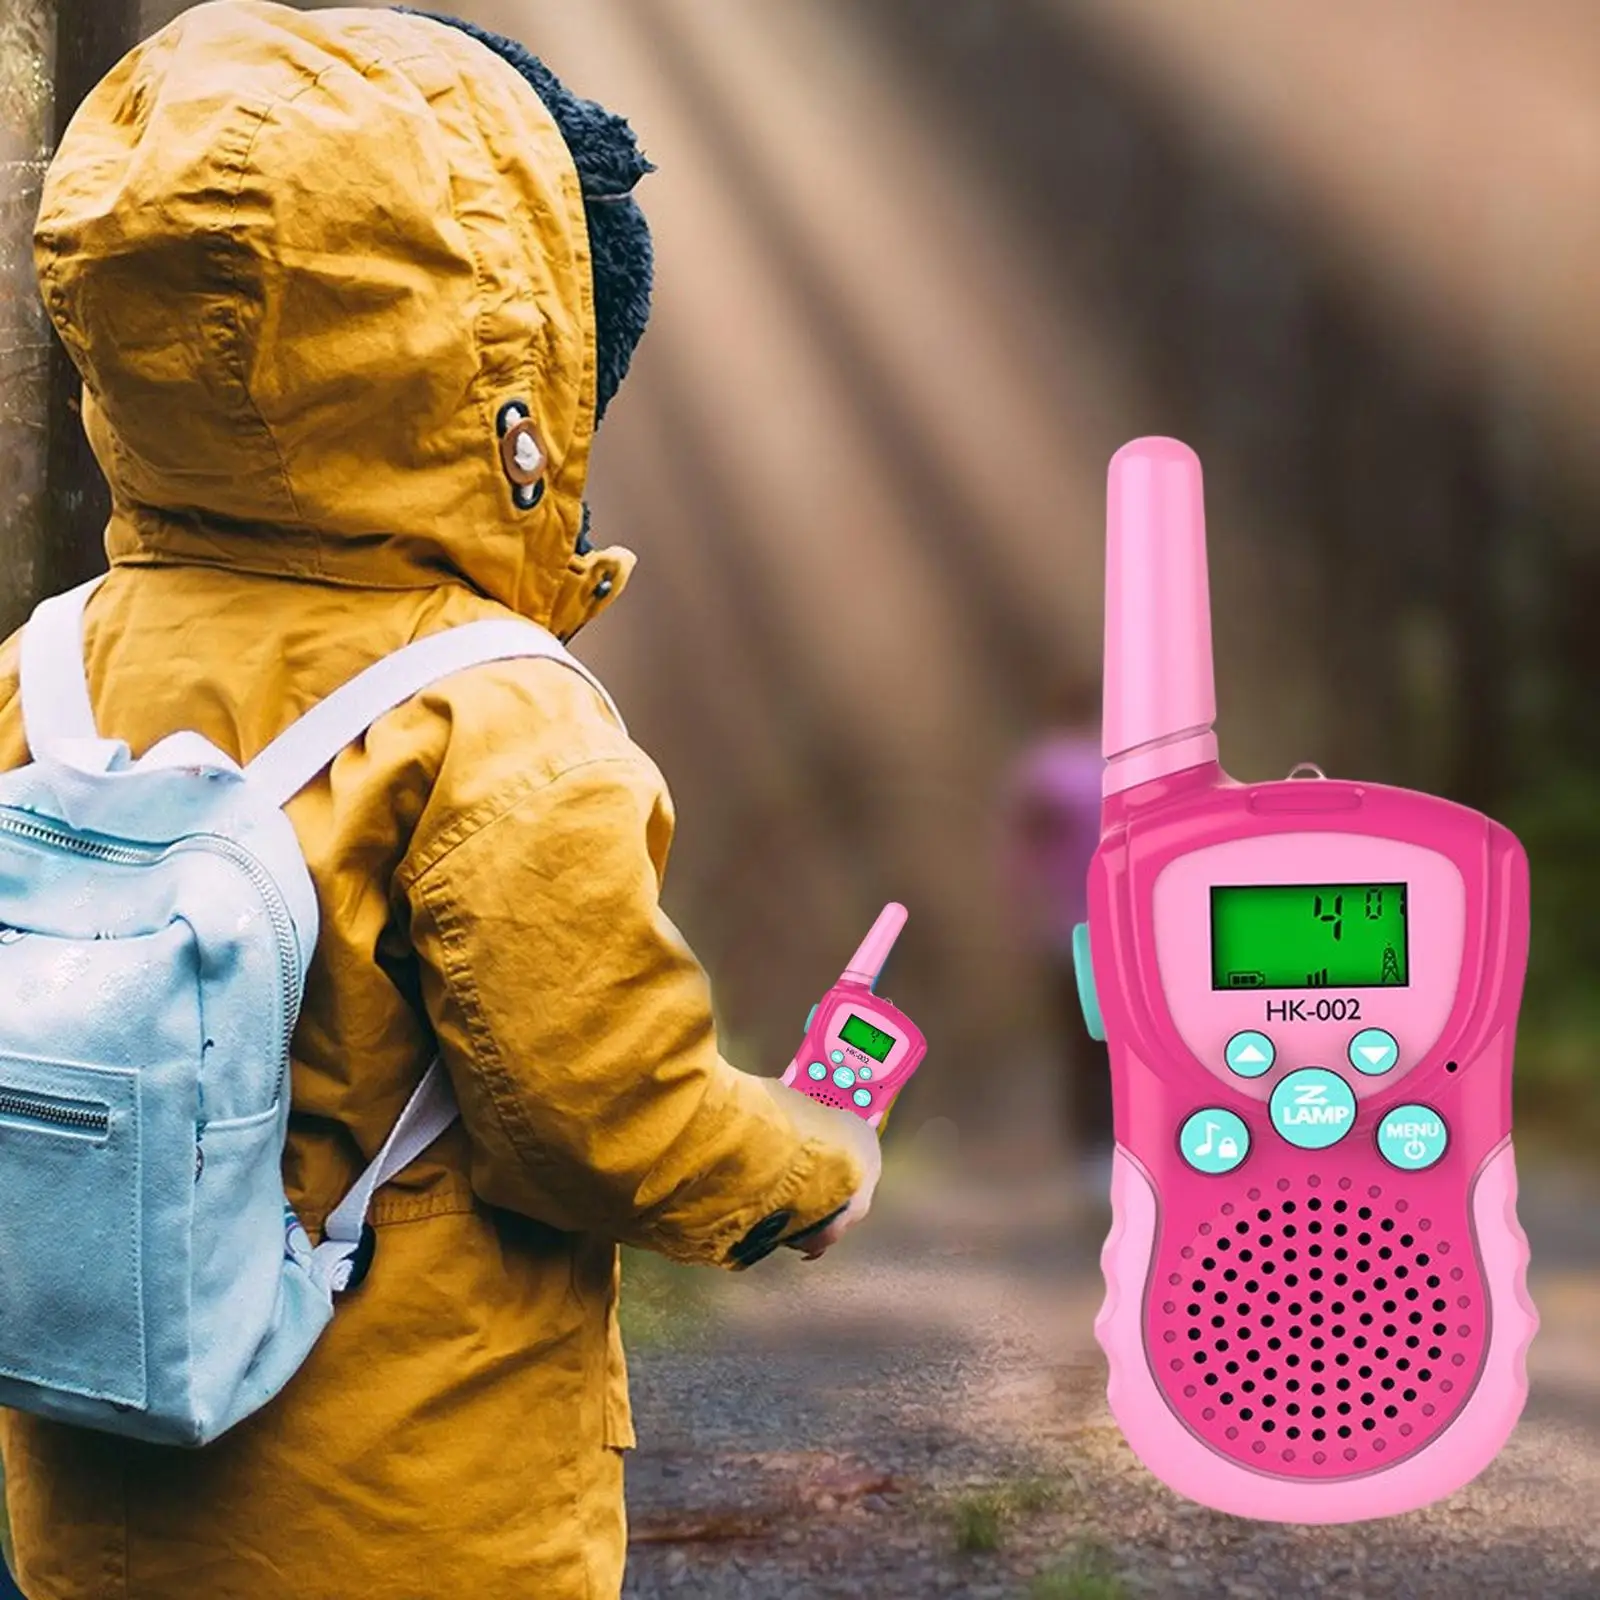 2Pcs Walkie Talkies for Kids Gifts Long Distance 2km Easy to Use Outdoor Toy for 3-12 Years Old Indoor Hiking Outdoor Camping